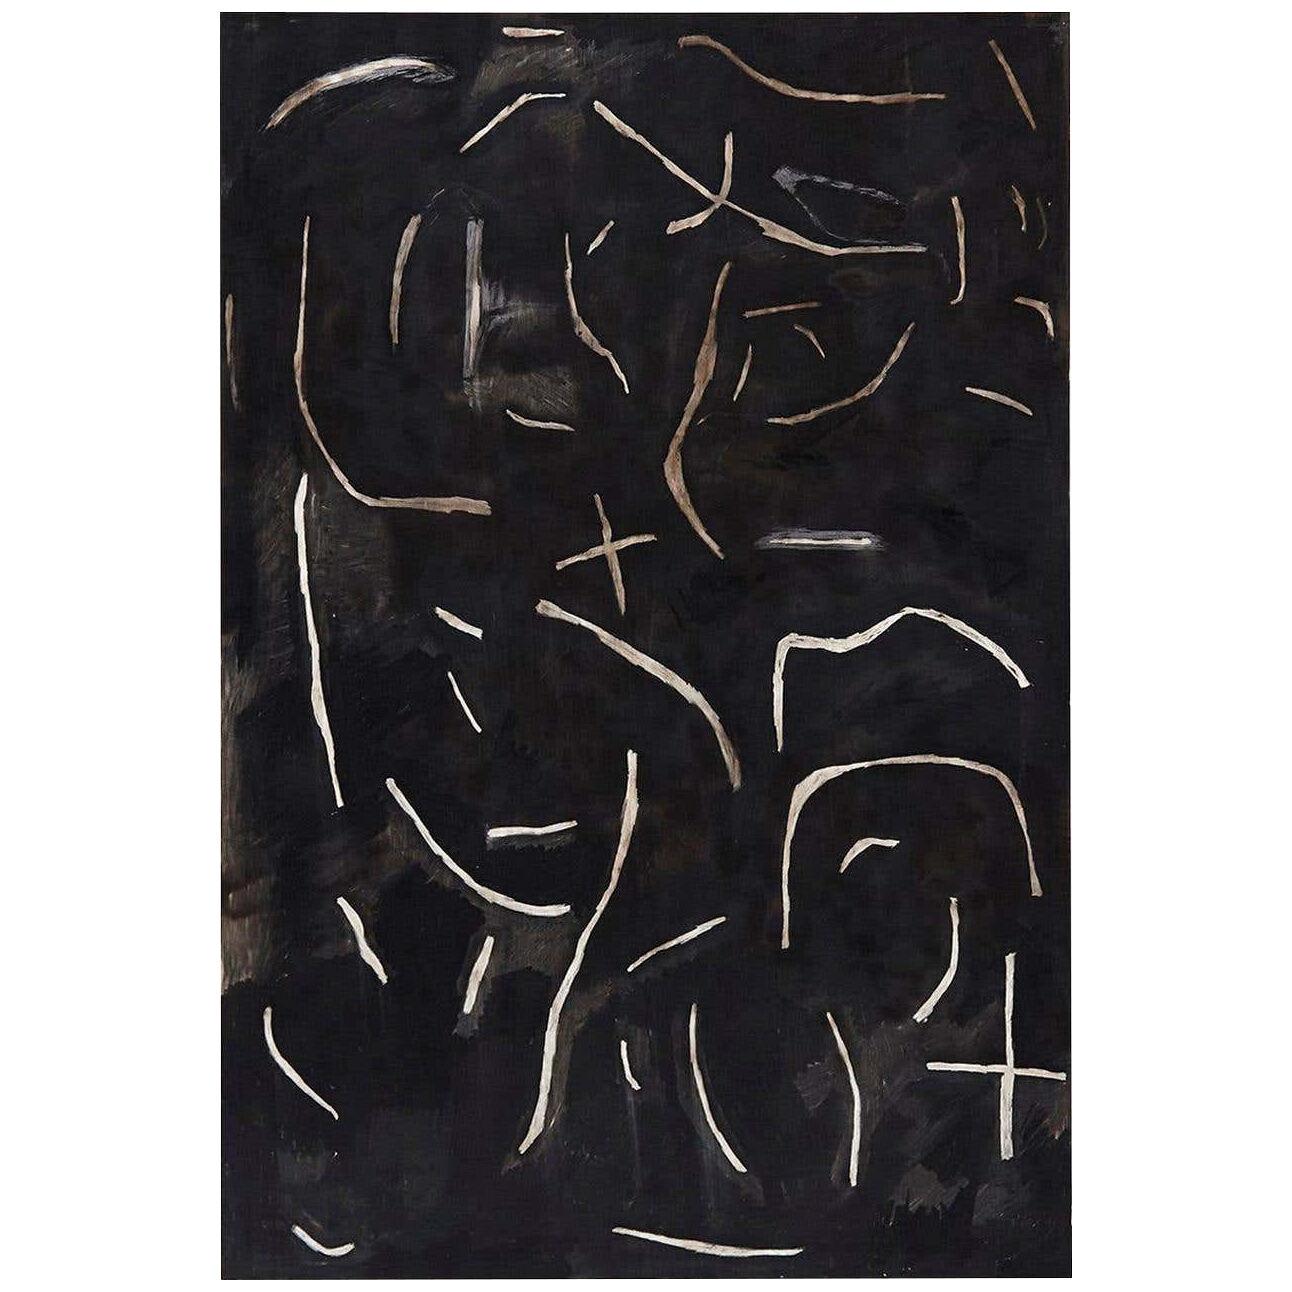 Adrian Contemporary Art Abstract Black Painting on Wood